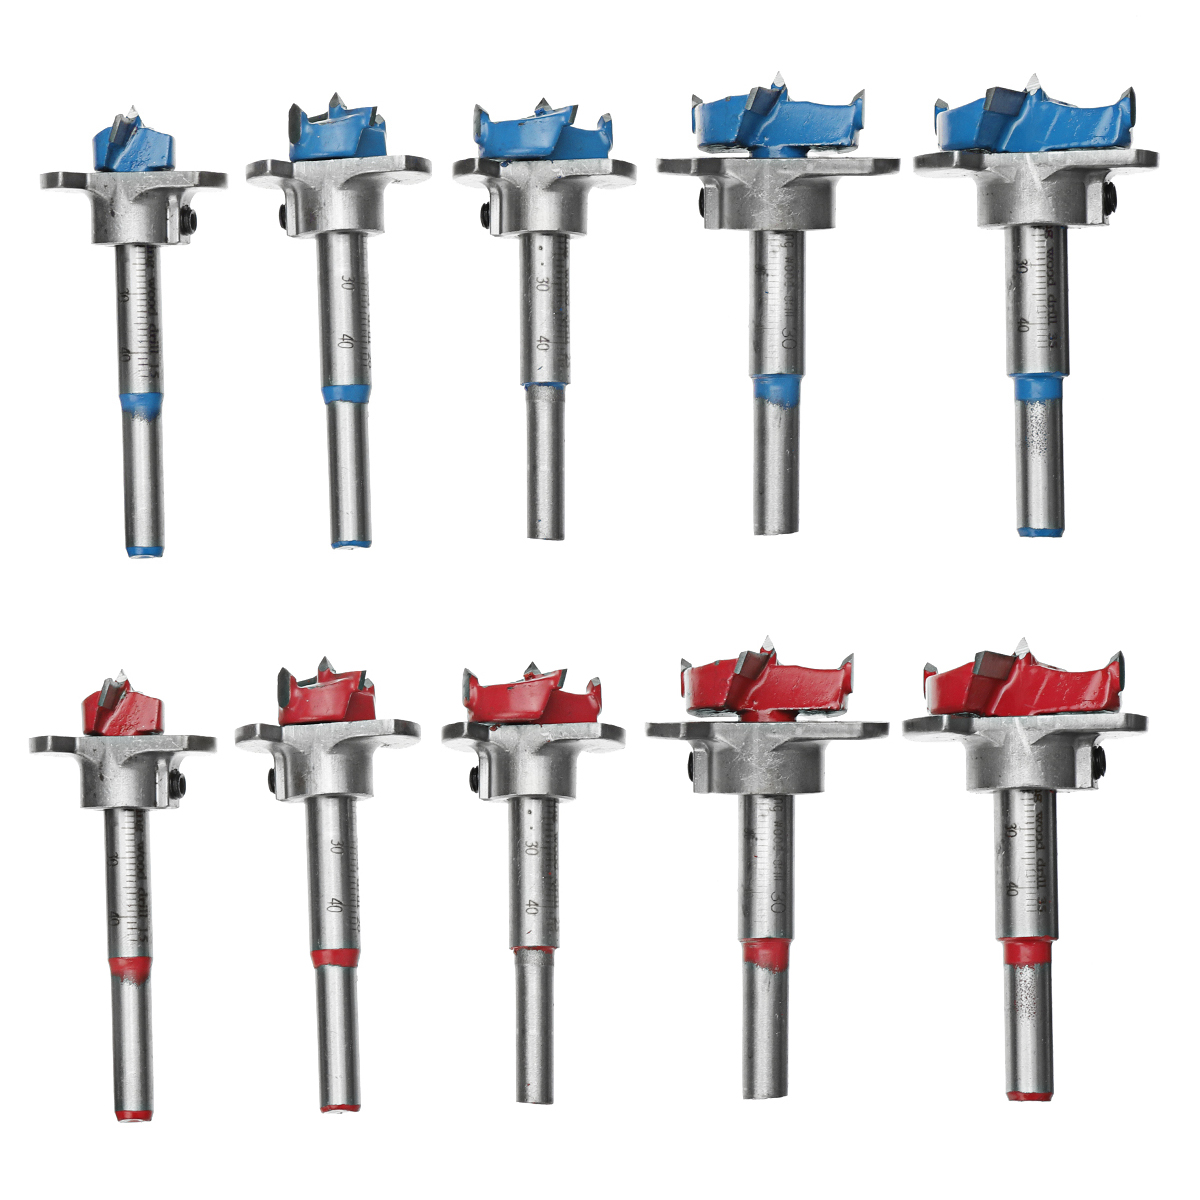 

7pcs Blue or Red Woodworking Hinge Hole Opener Set Positioning Hole Saw Cutter Drill Bits